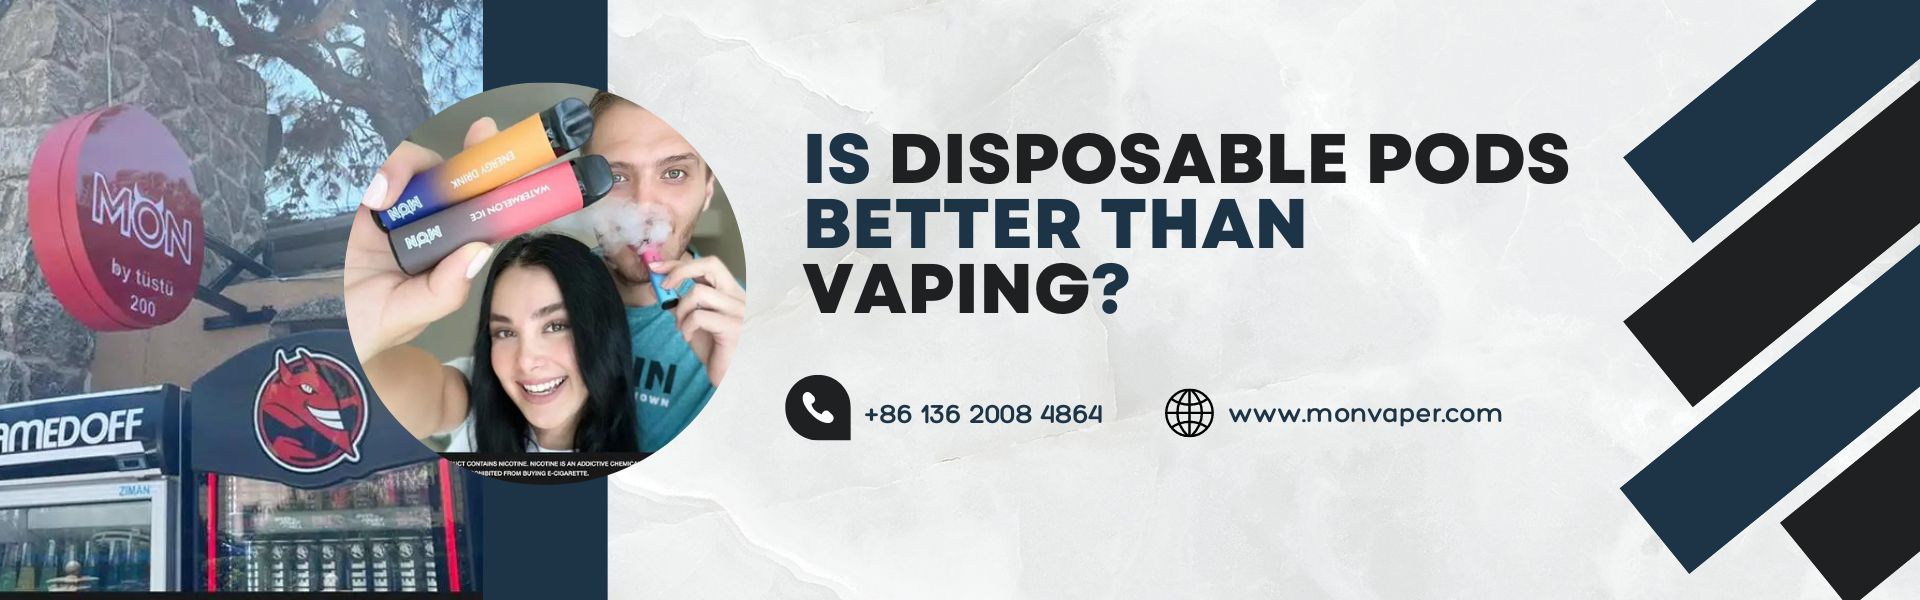 Is disposable pods better than vapning